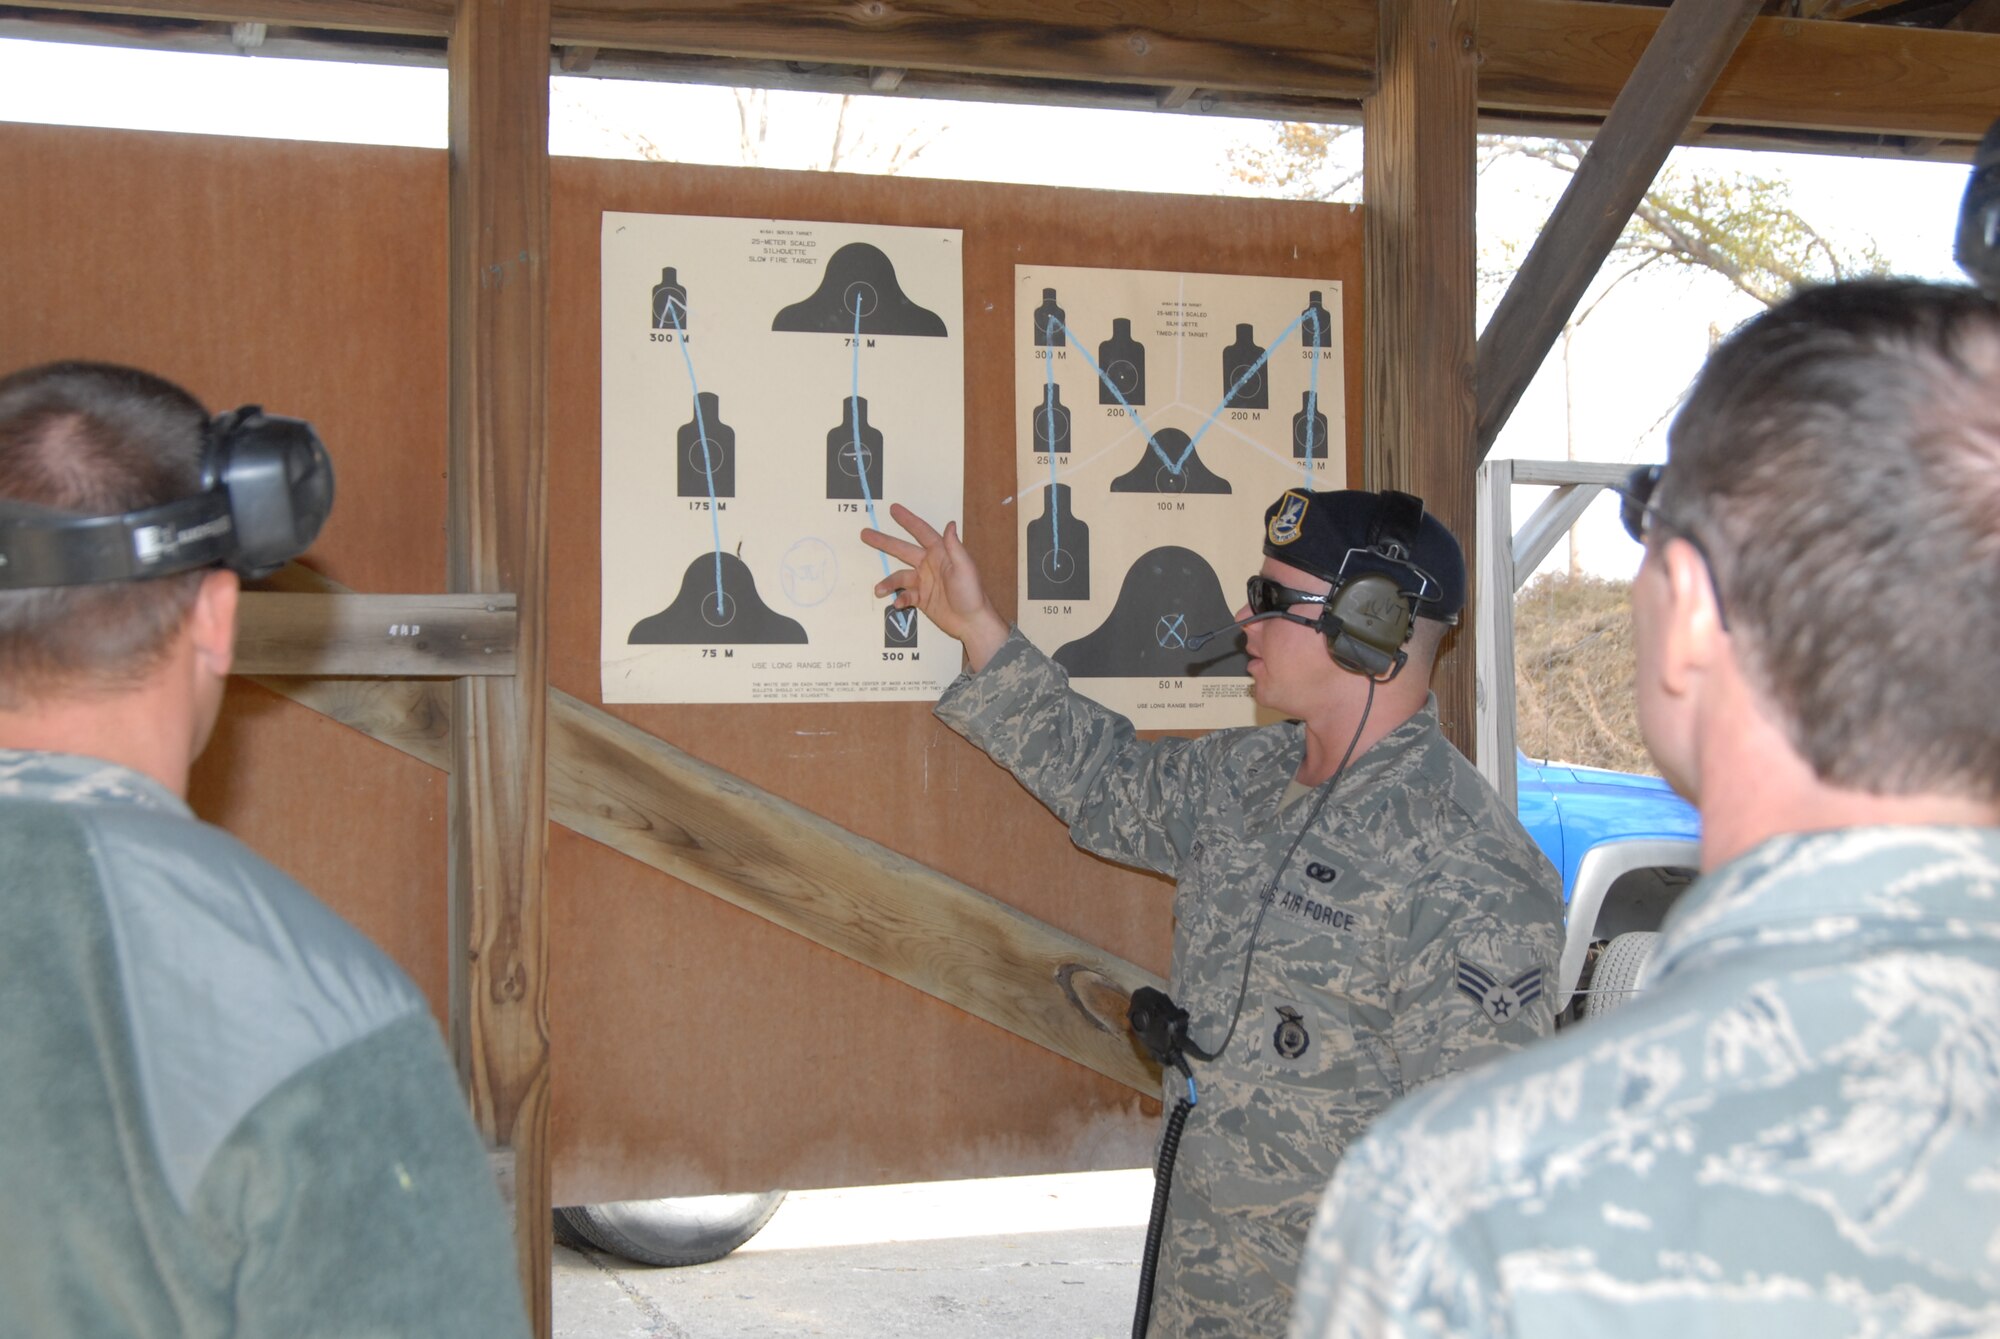 Senior Airman Russel Stout explains the course of fire to members of the 185th Air Refuleing Wing, Sioux City, Iowa, on 5 November, 2011. The 185th's CATM is responsible for both training airmen in combat arms and maintaining the weapons. (US Photo by 2LT Jeremy J. McClure)